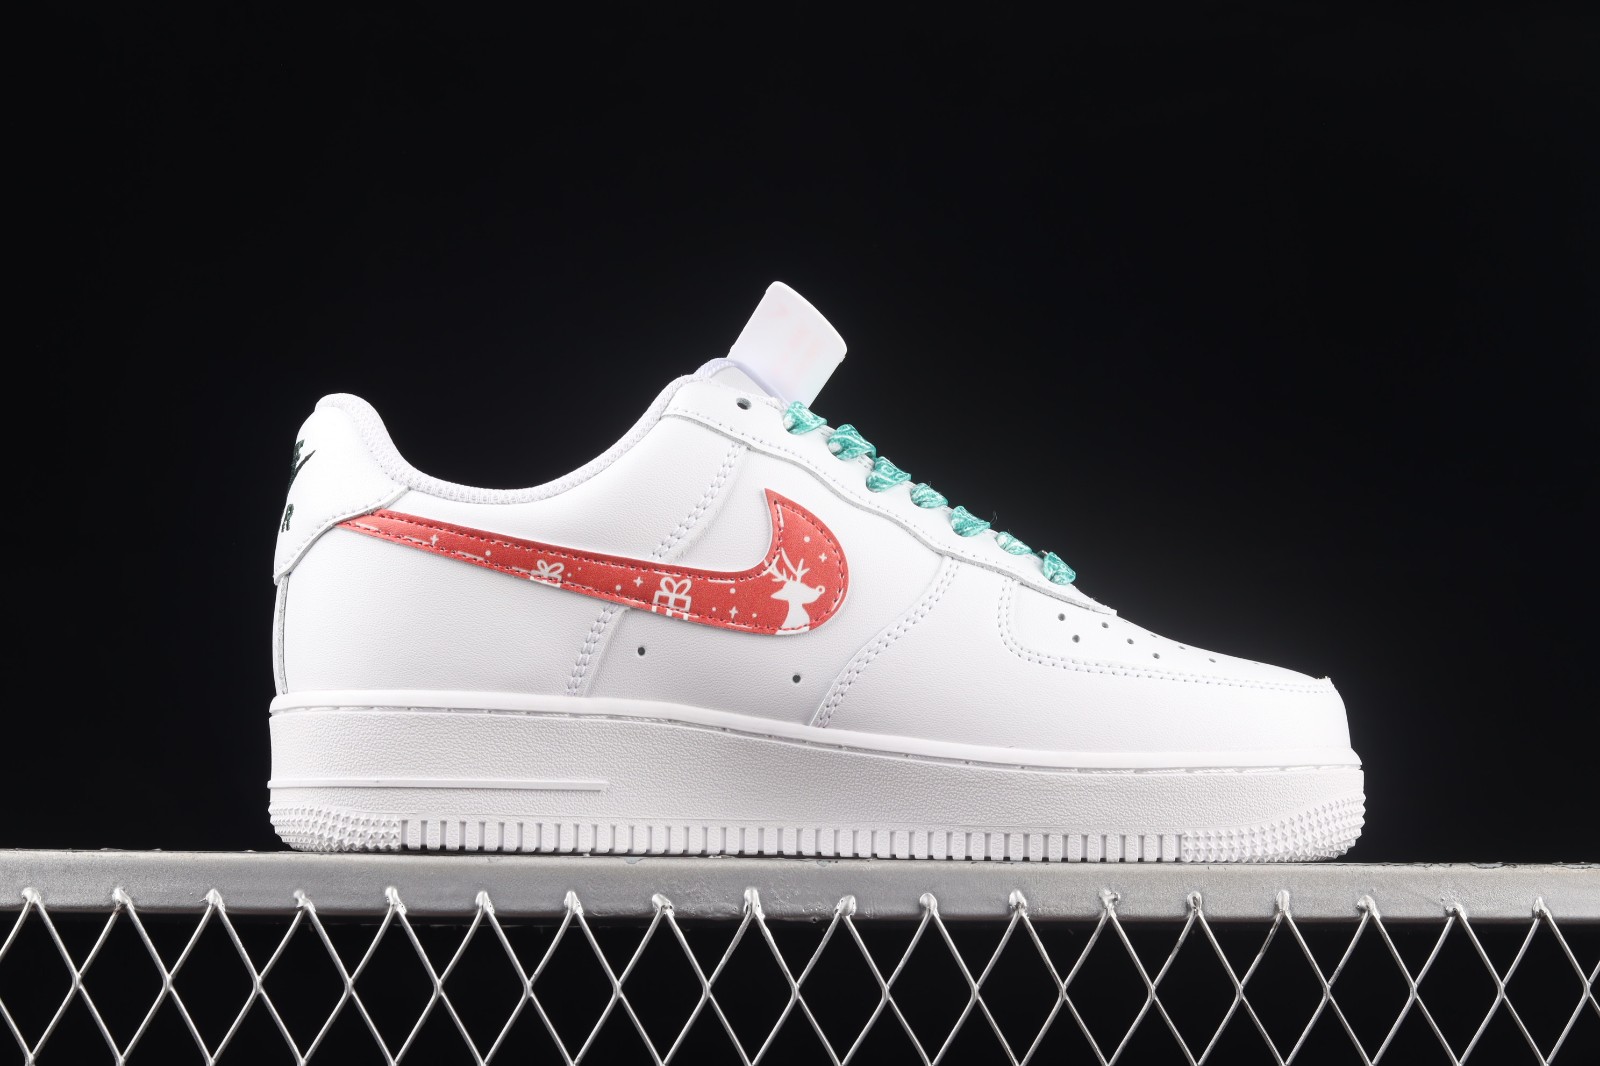 MultiscaleconsultingShops - 131 - Nike Air Force 1 07 Low